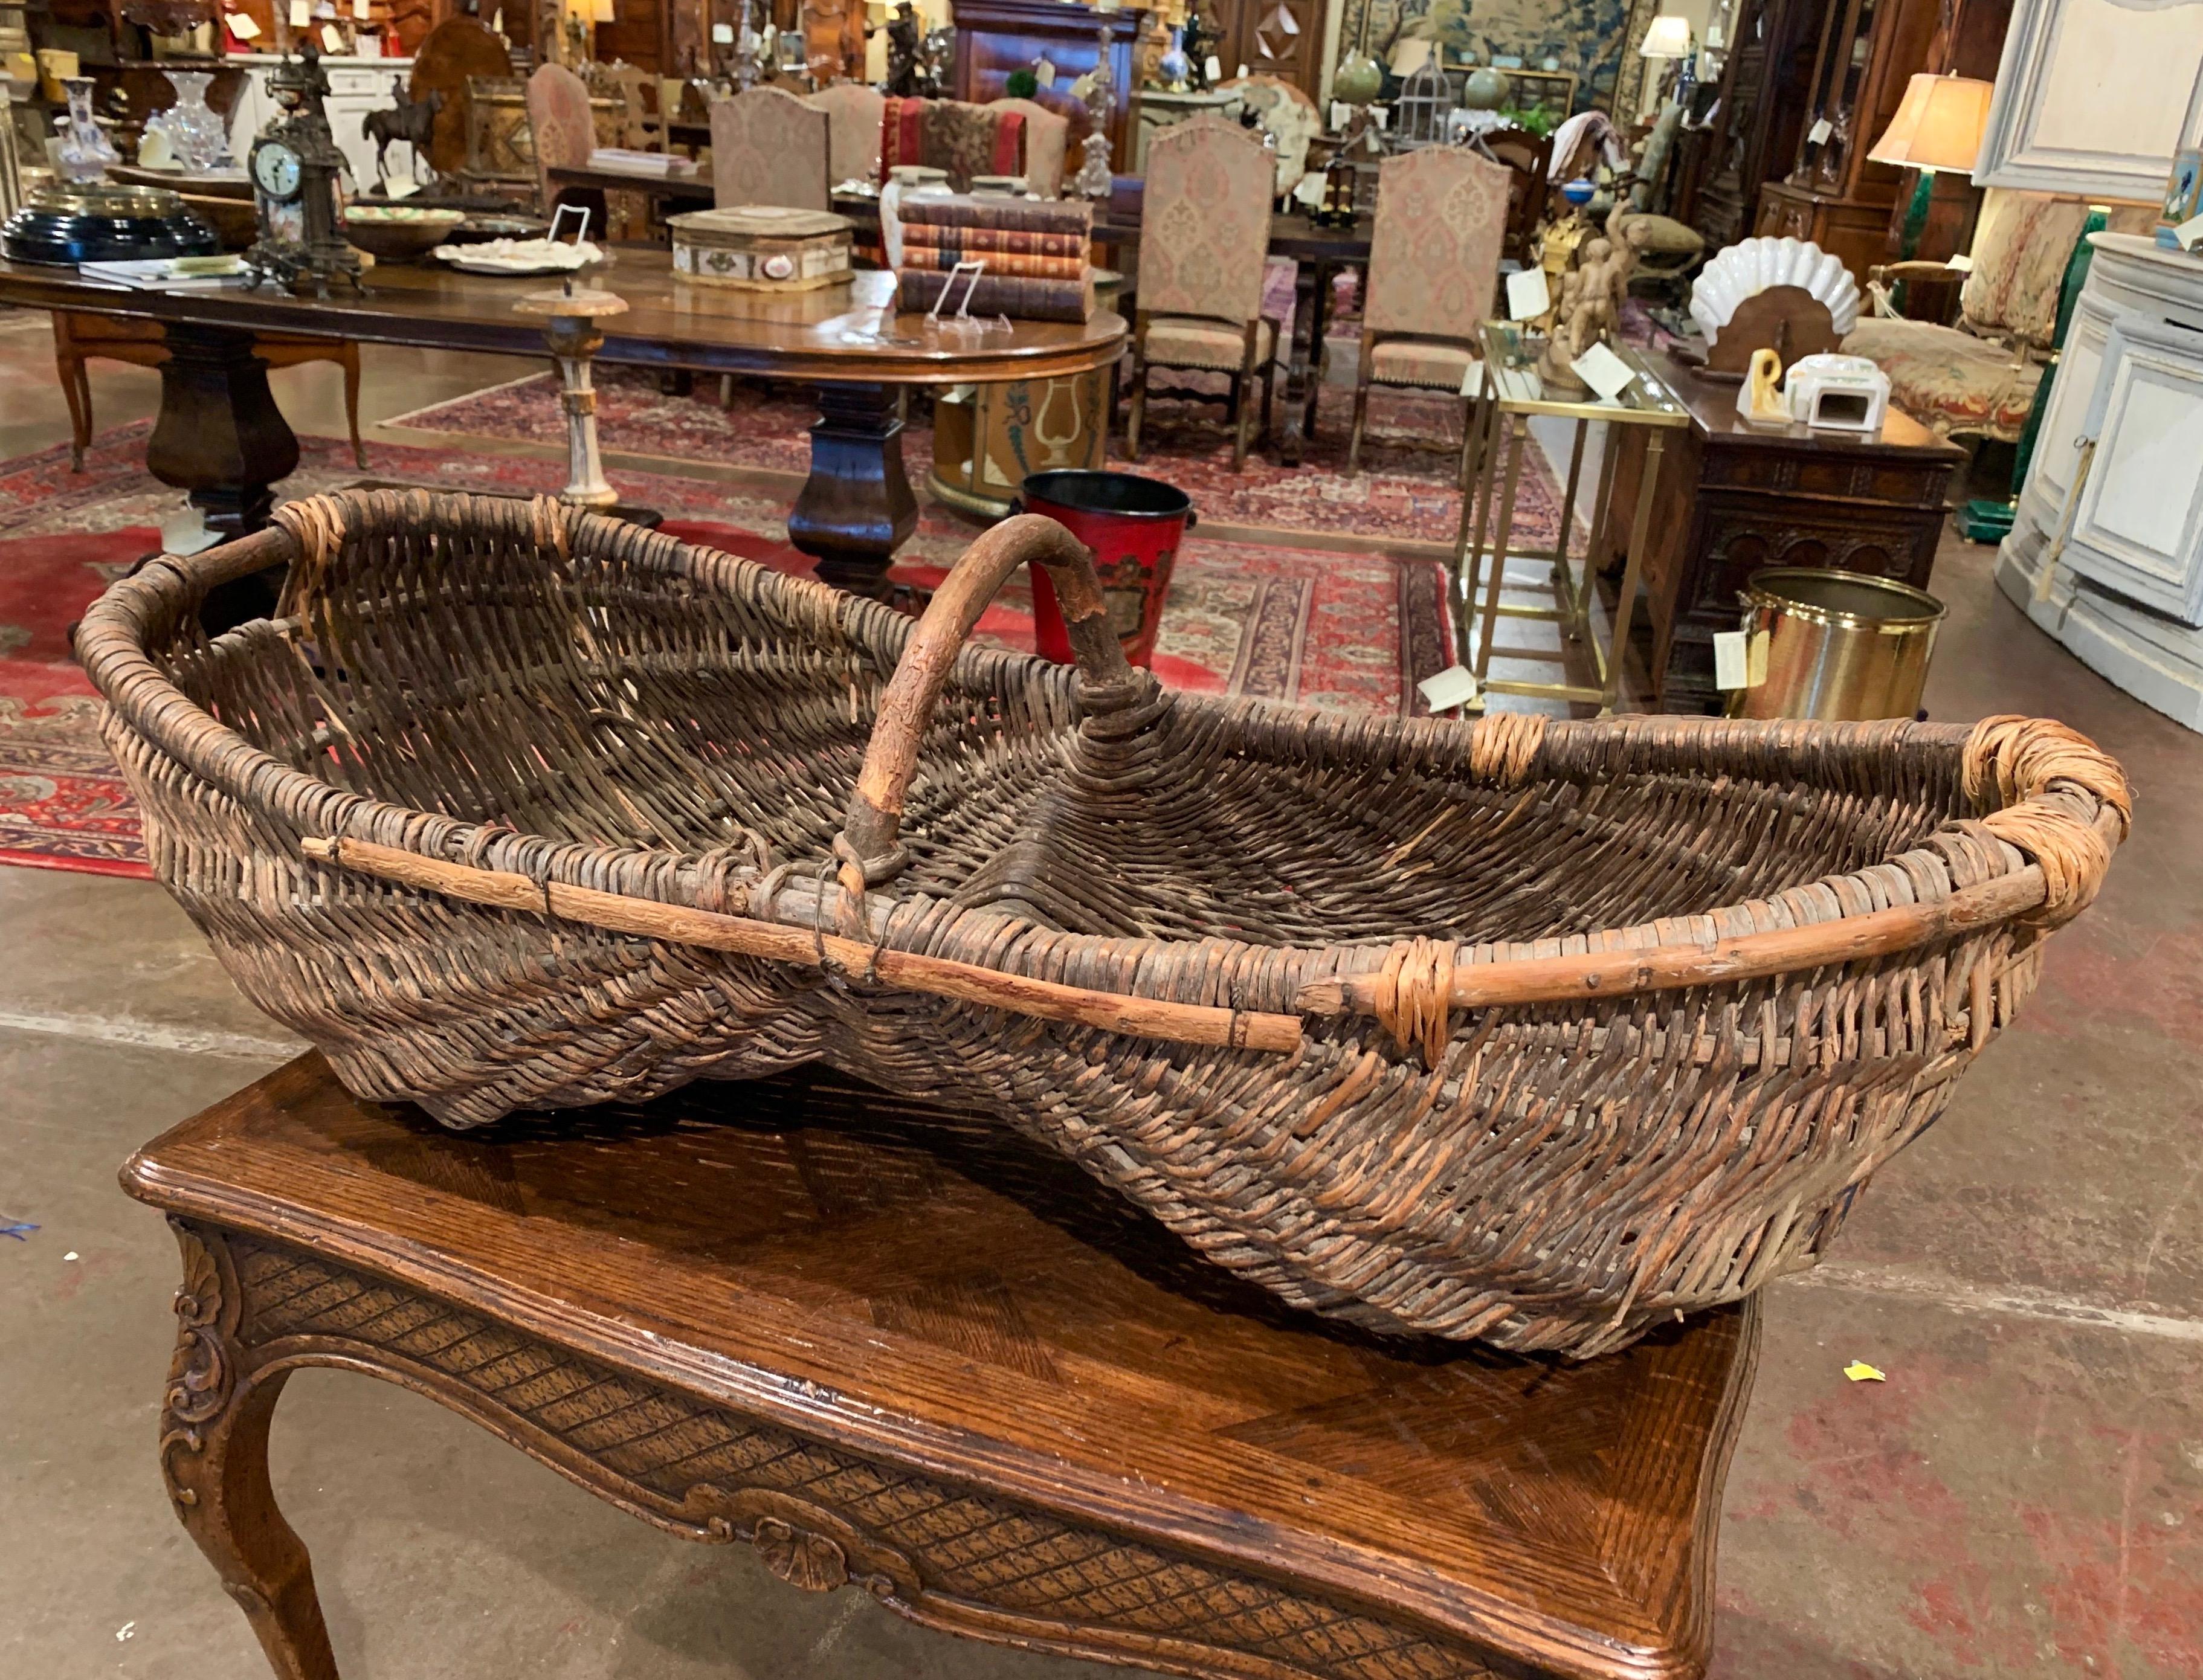 Hand-Woven 19th Century French Handwoven Wicker Grape Harvesting Basket with Wood Handle